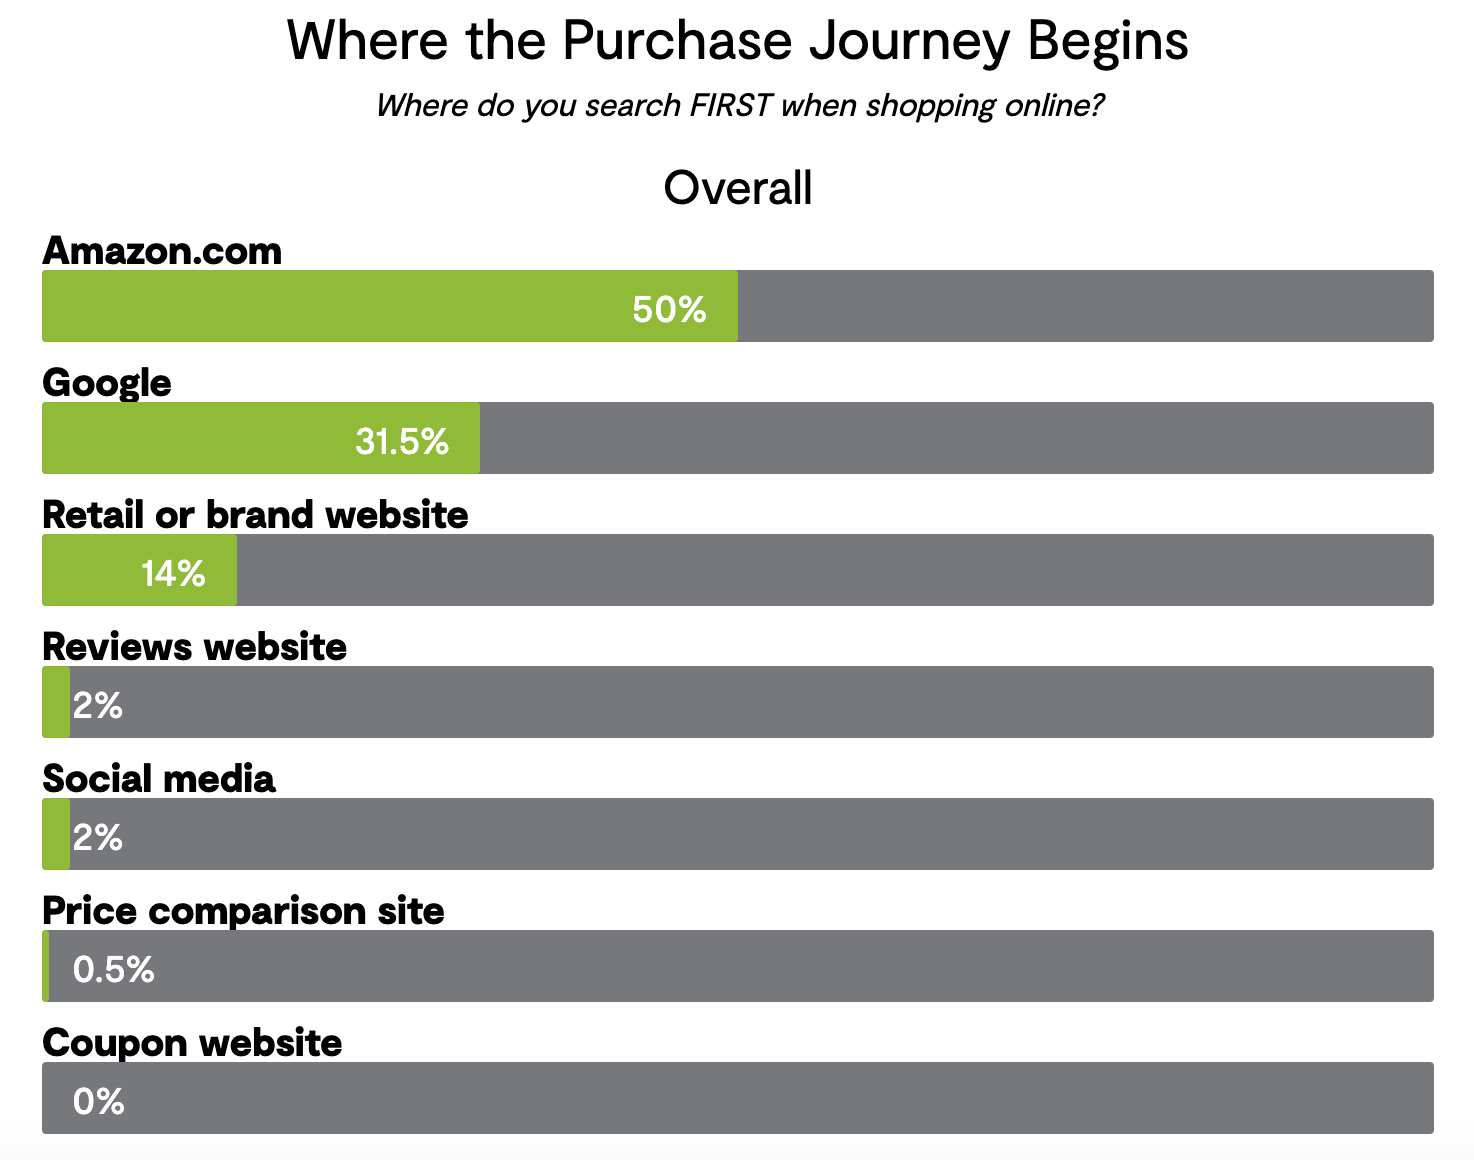 Where the purchase journey begins